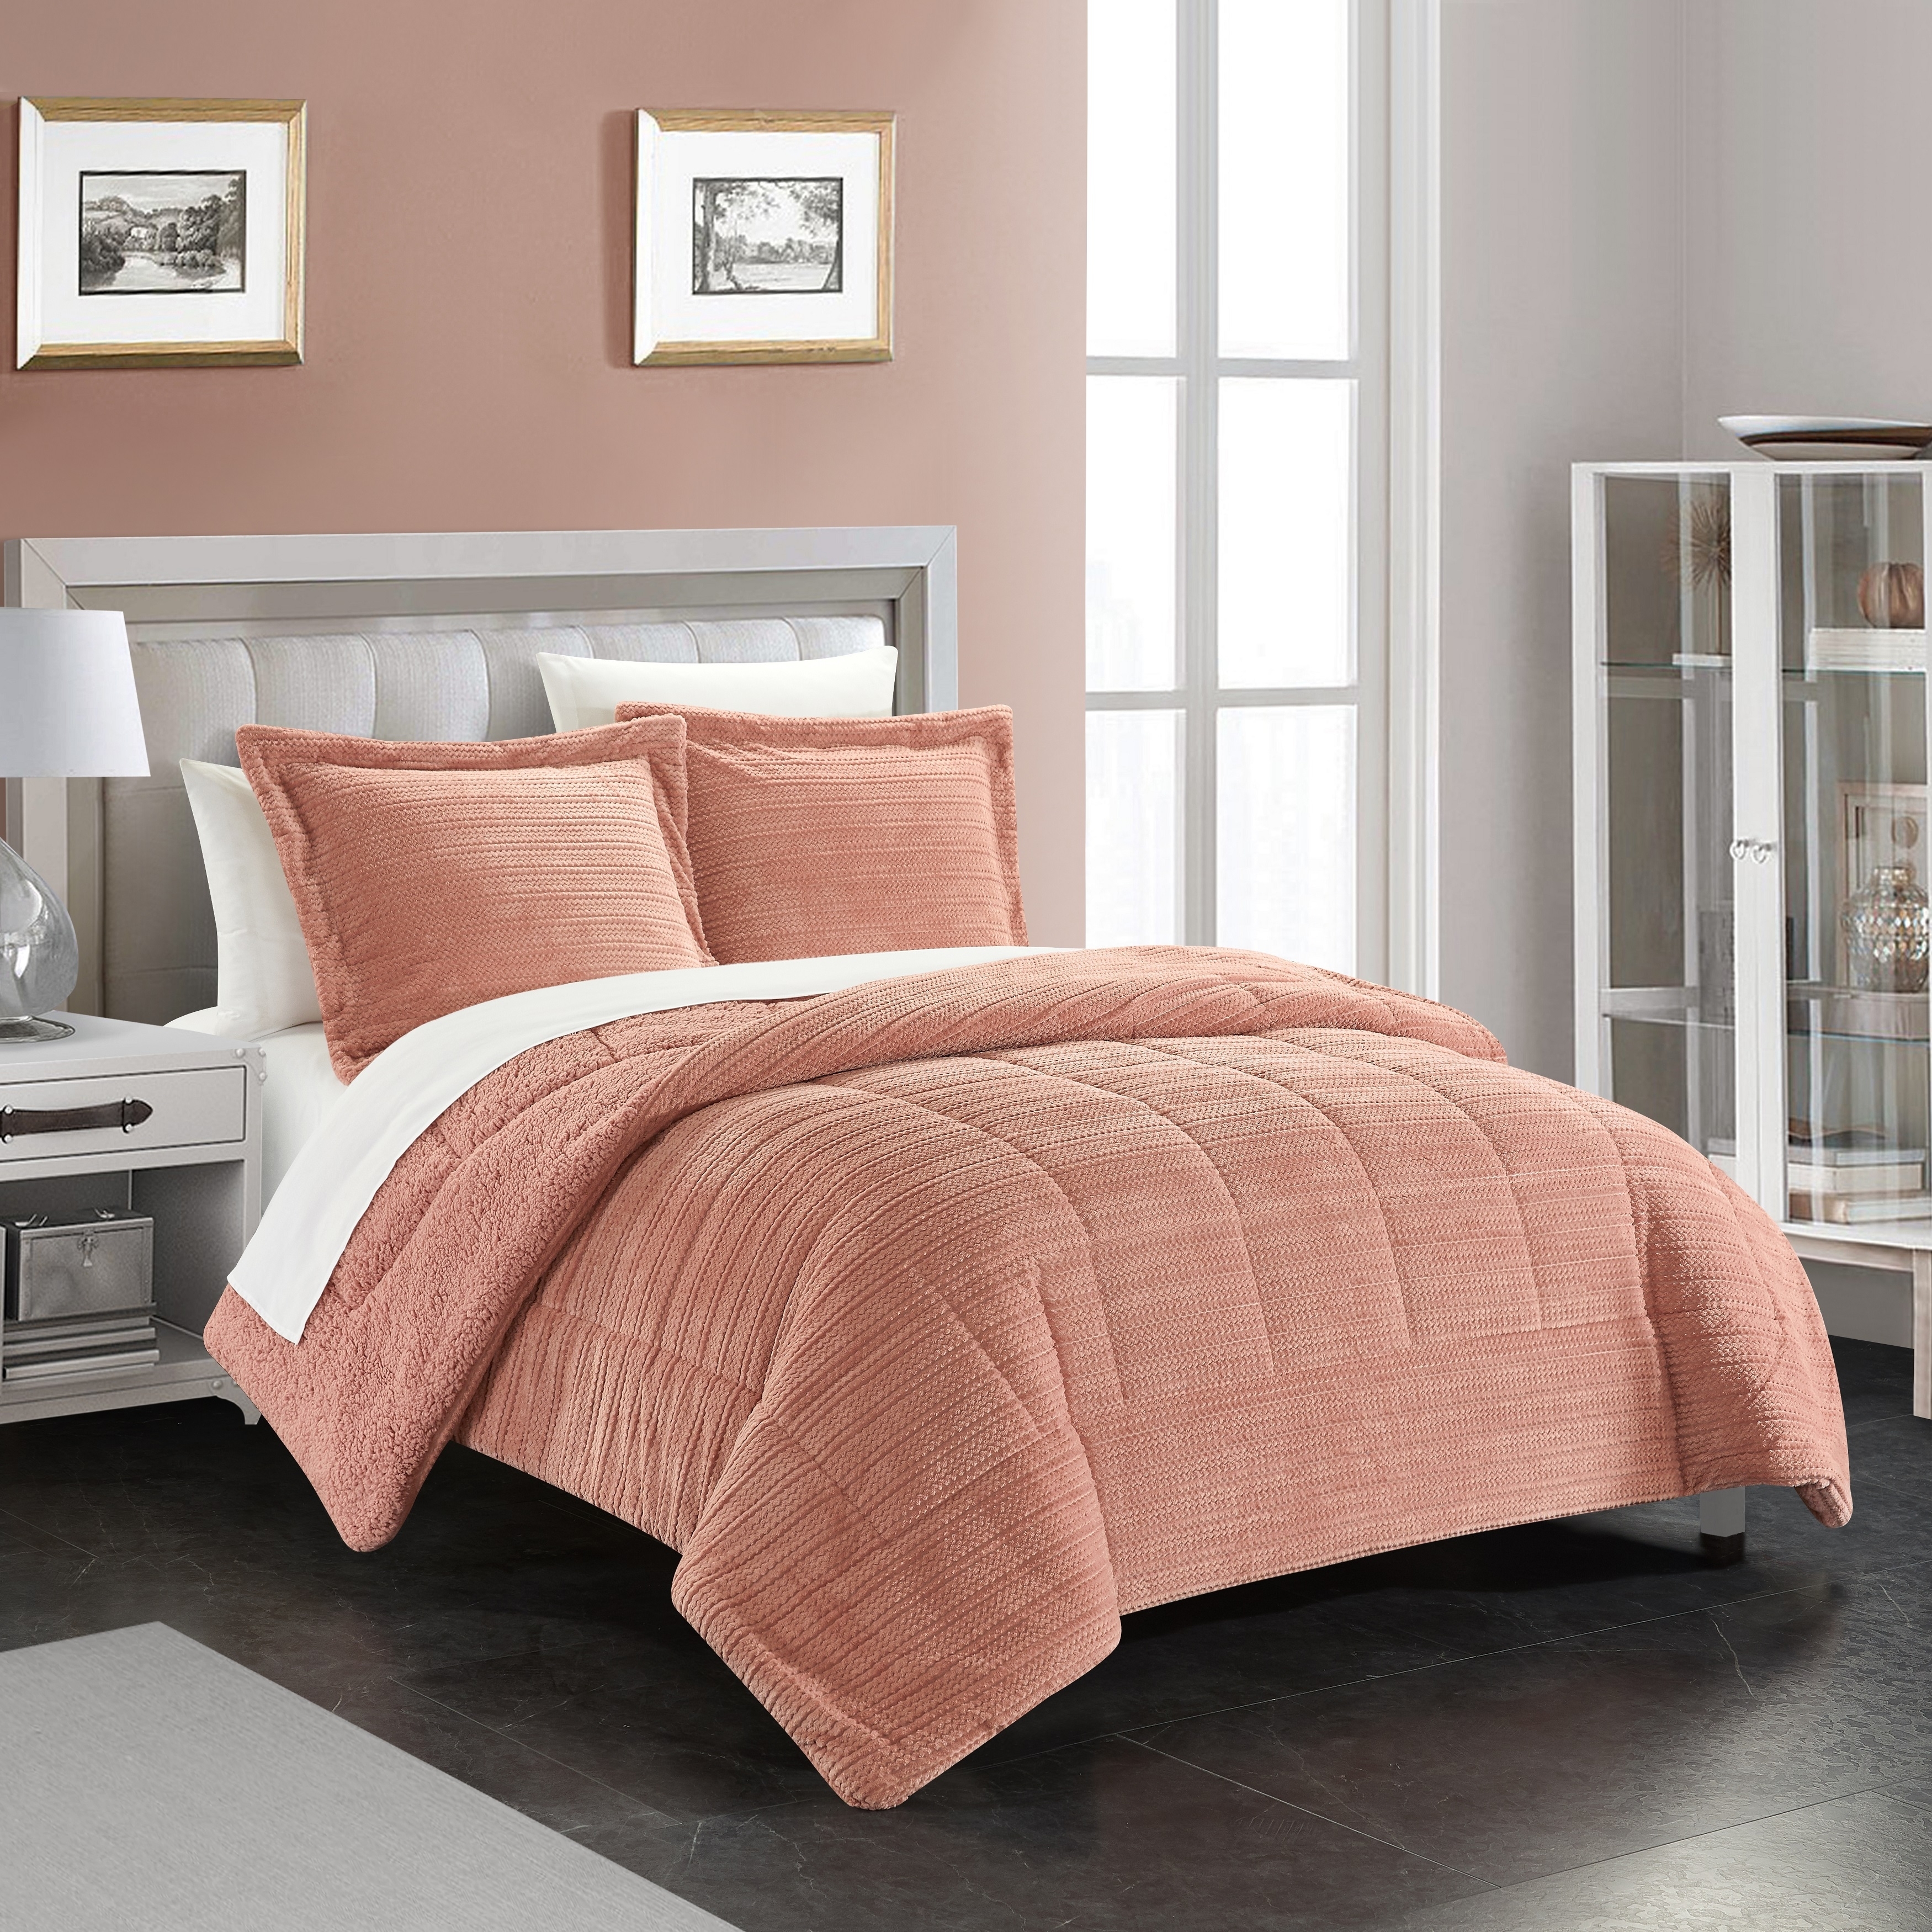 Ryland 3 Or 2 Piece Comforter Set Ribbed Textured Microplush Sherpa Bedding - Pillow Shams Included - Blush, King